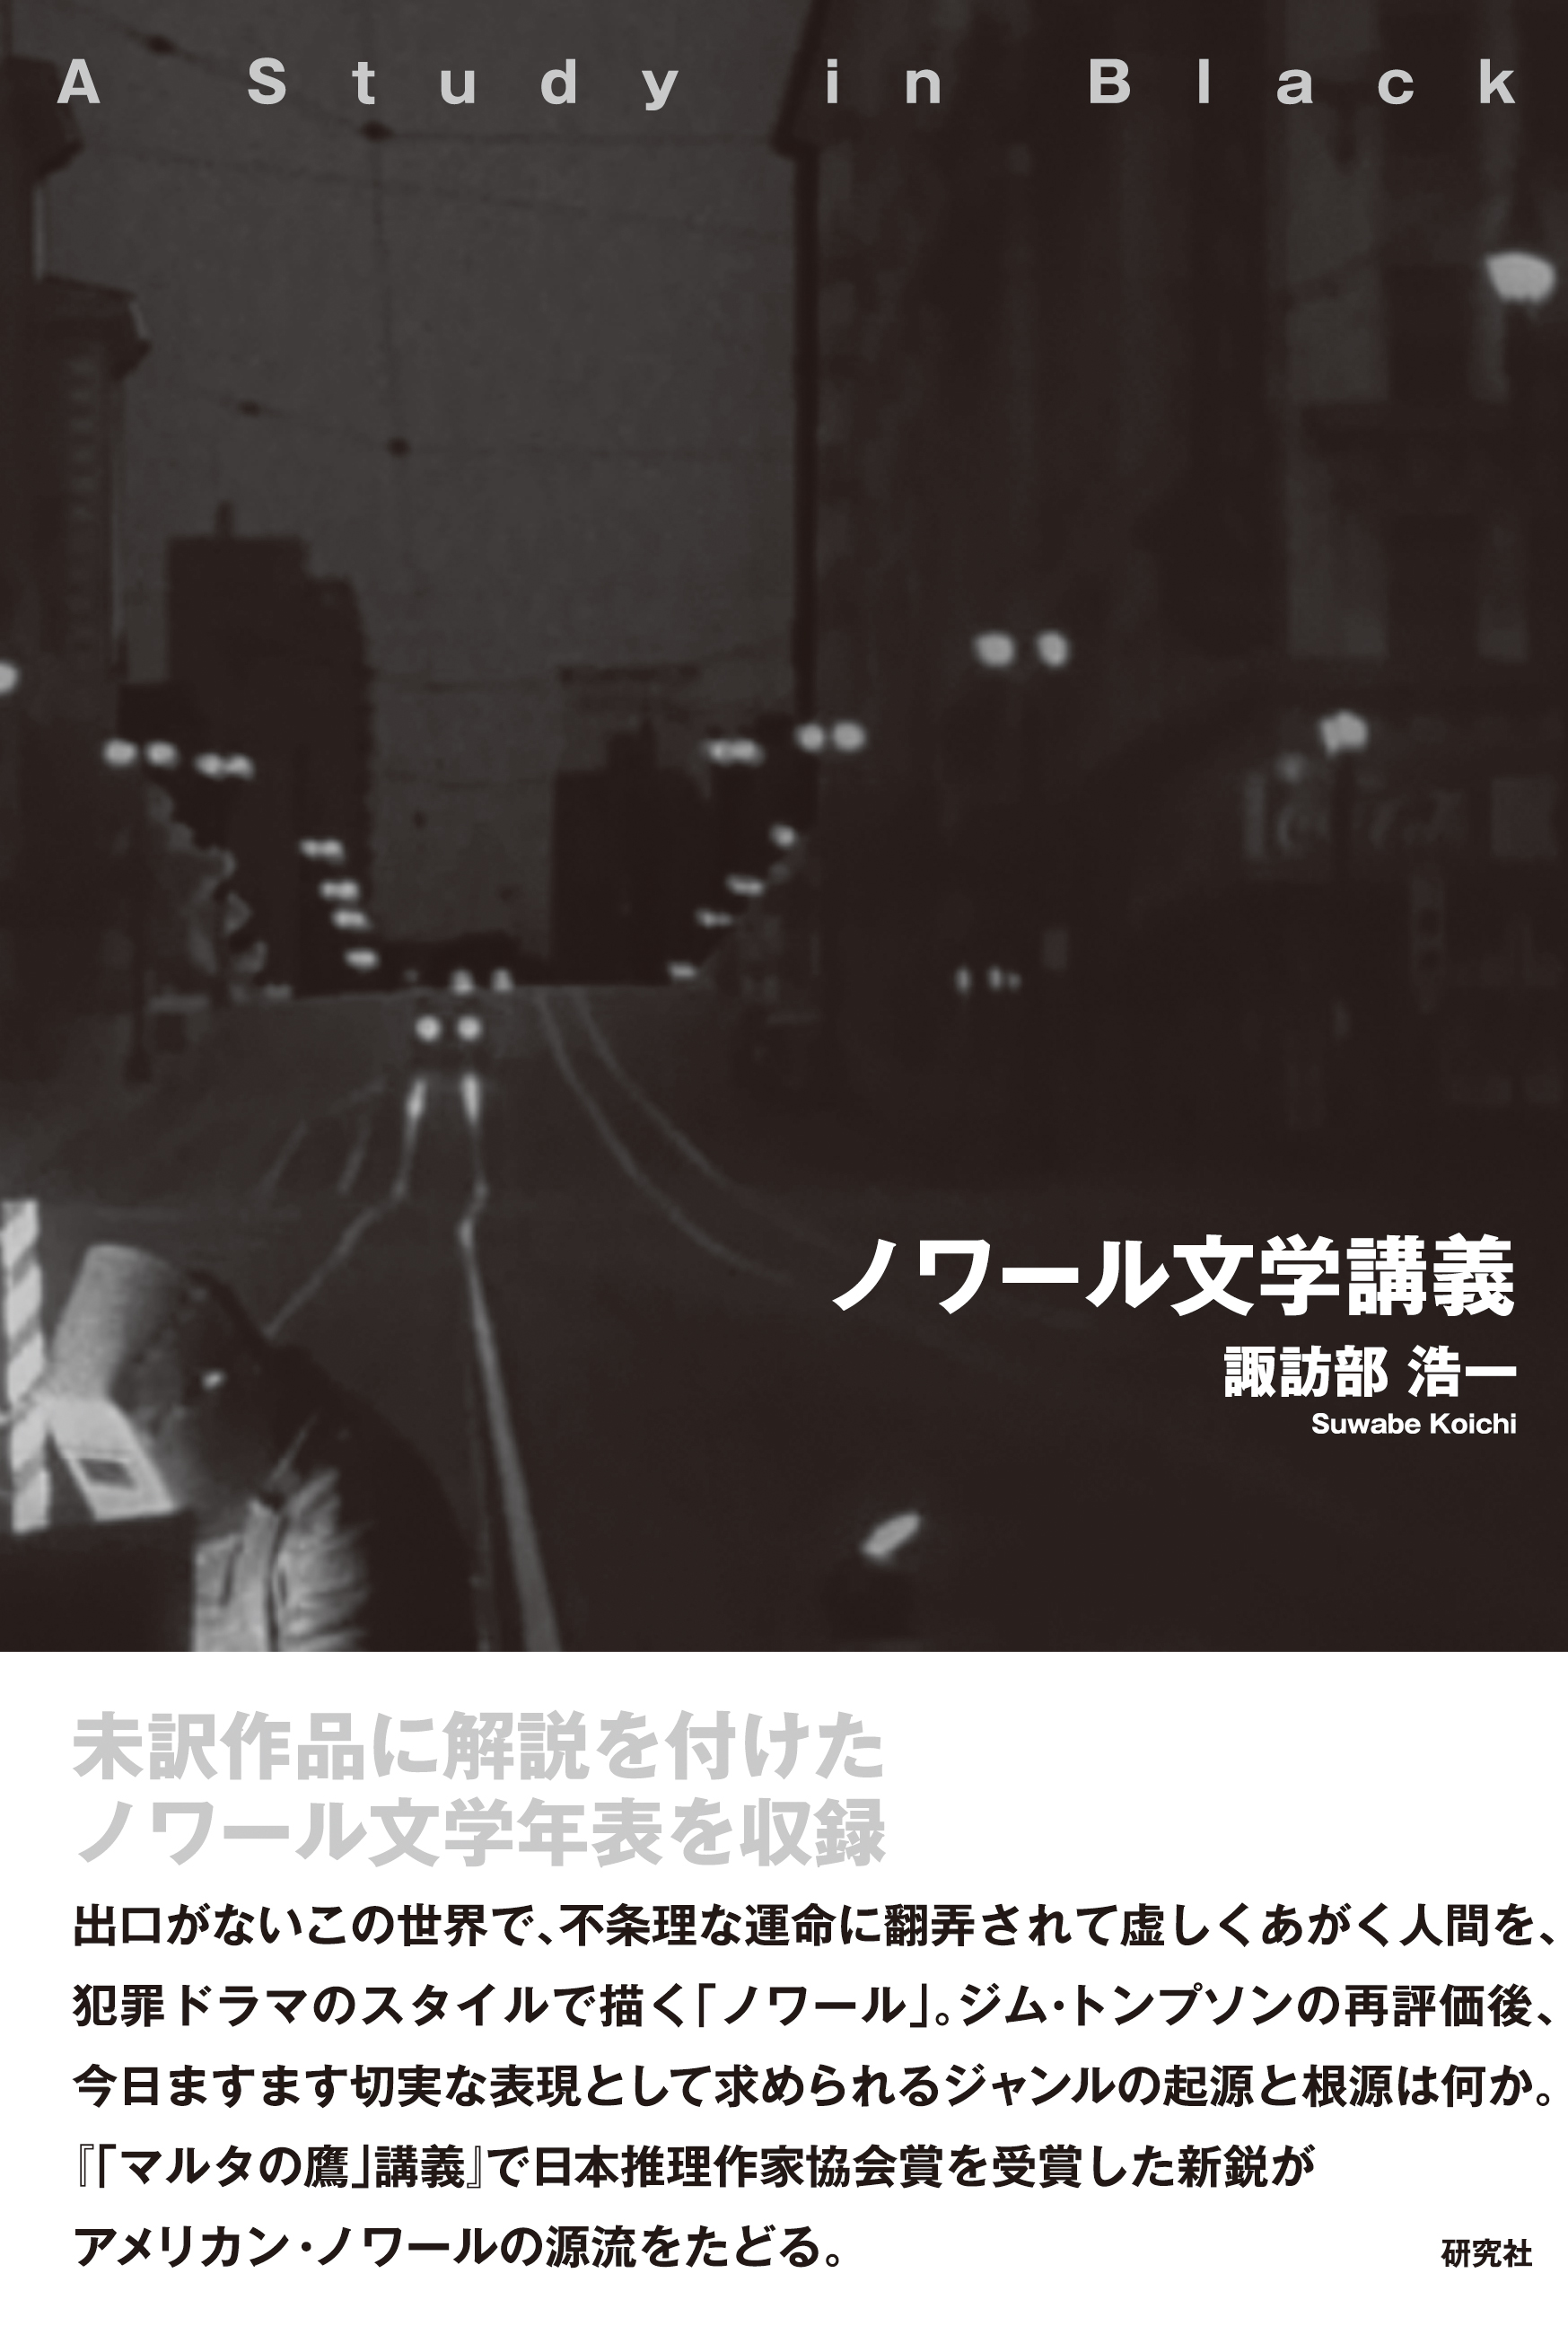 A monochrome photo of the road on the white cover, a comment appears on the band “chronology of Noir Fiction is included with comments on untranslated works.”